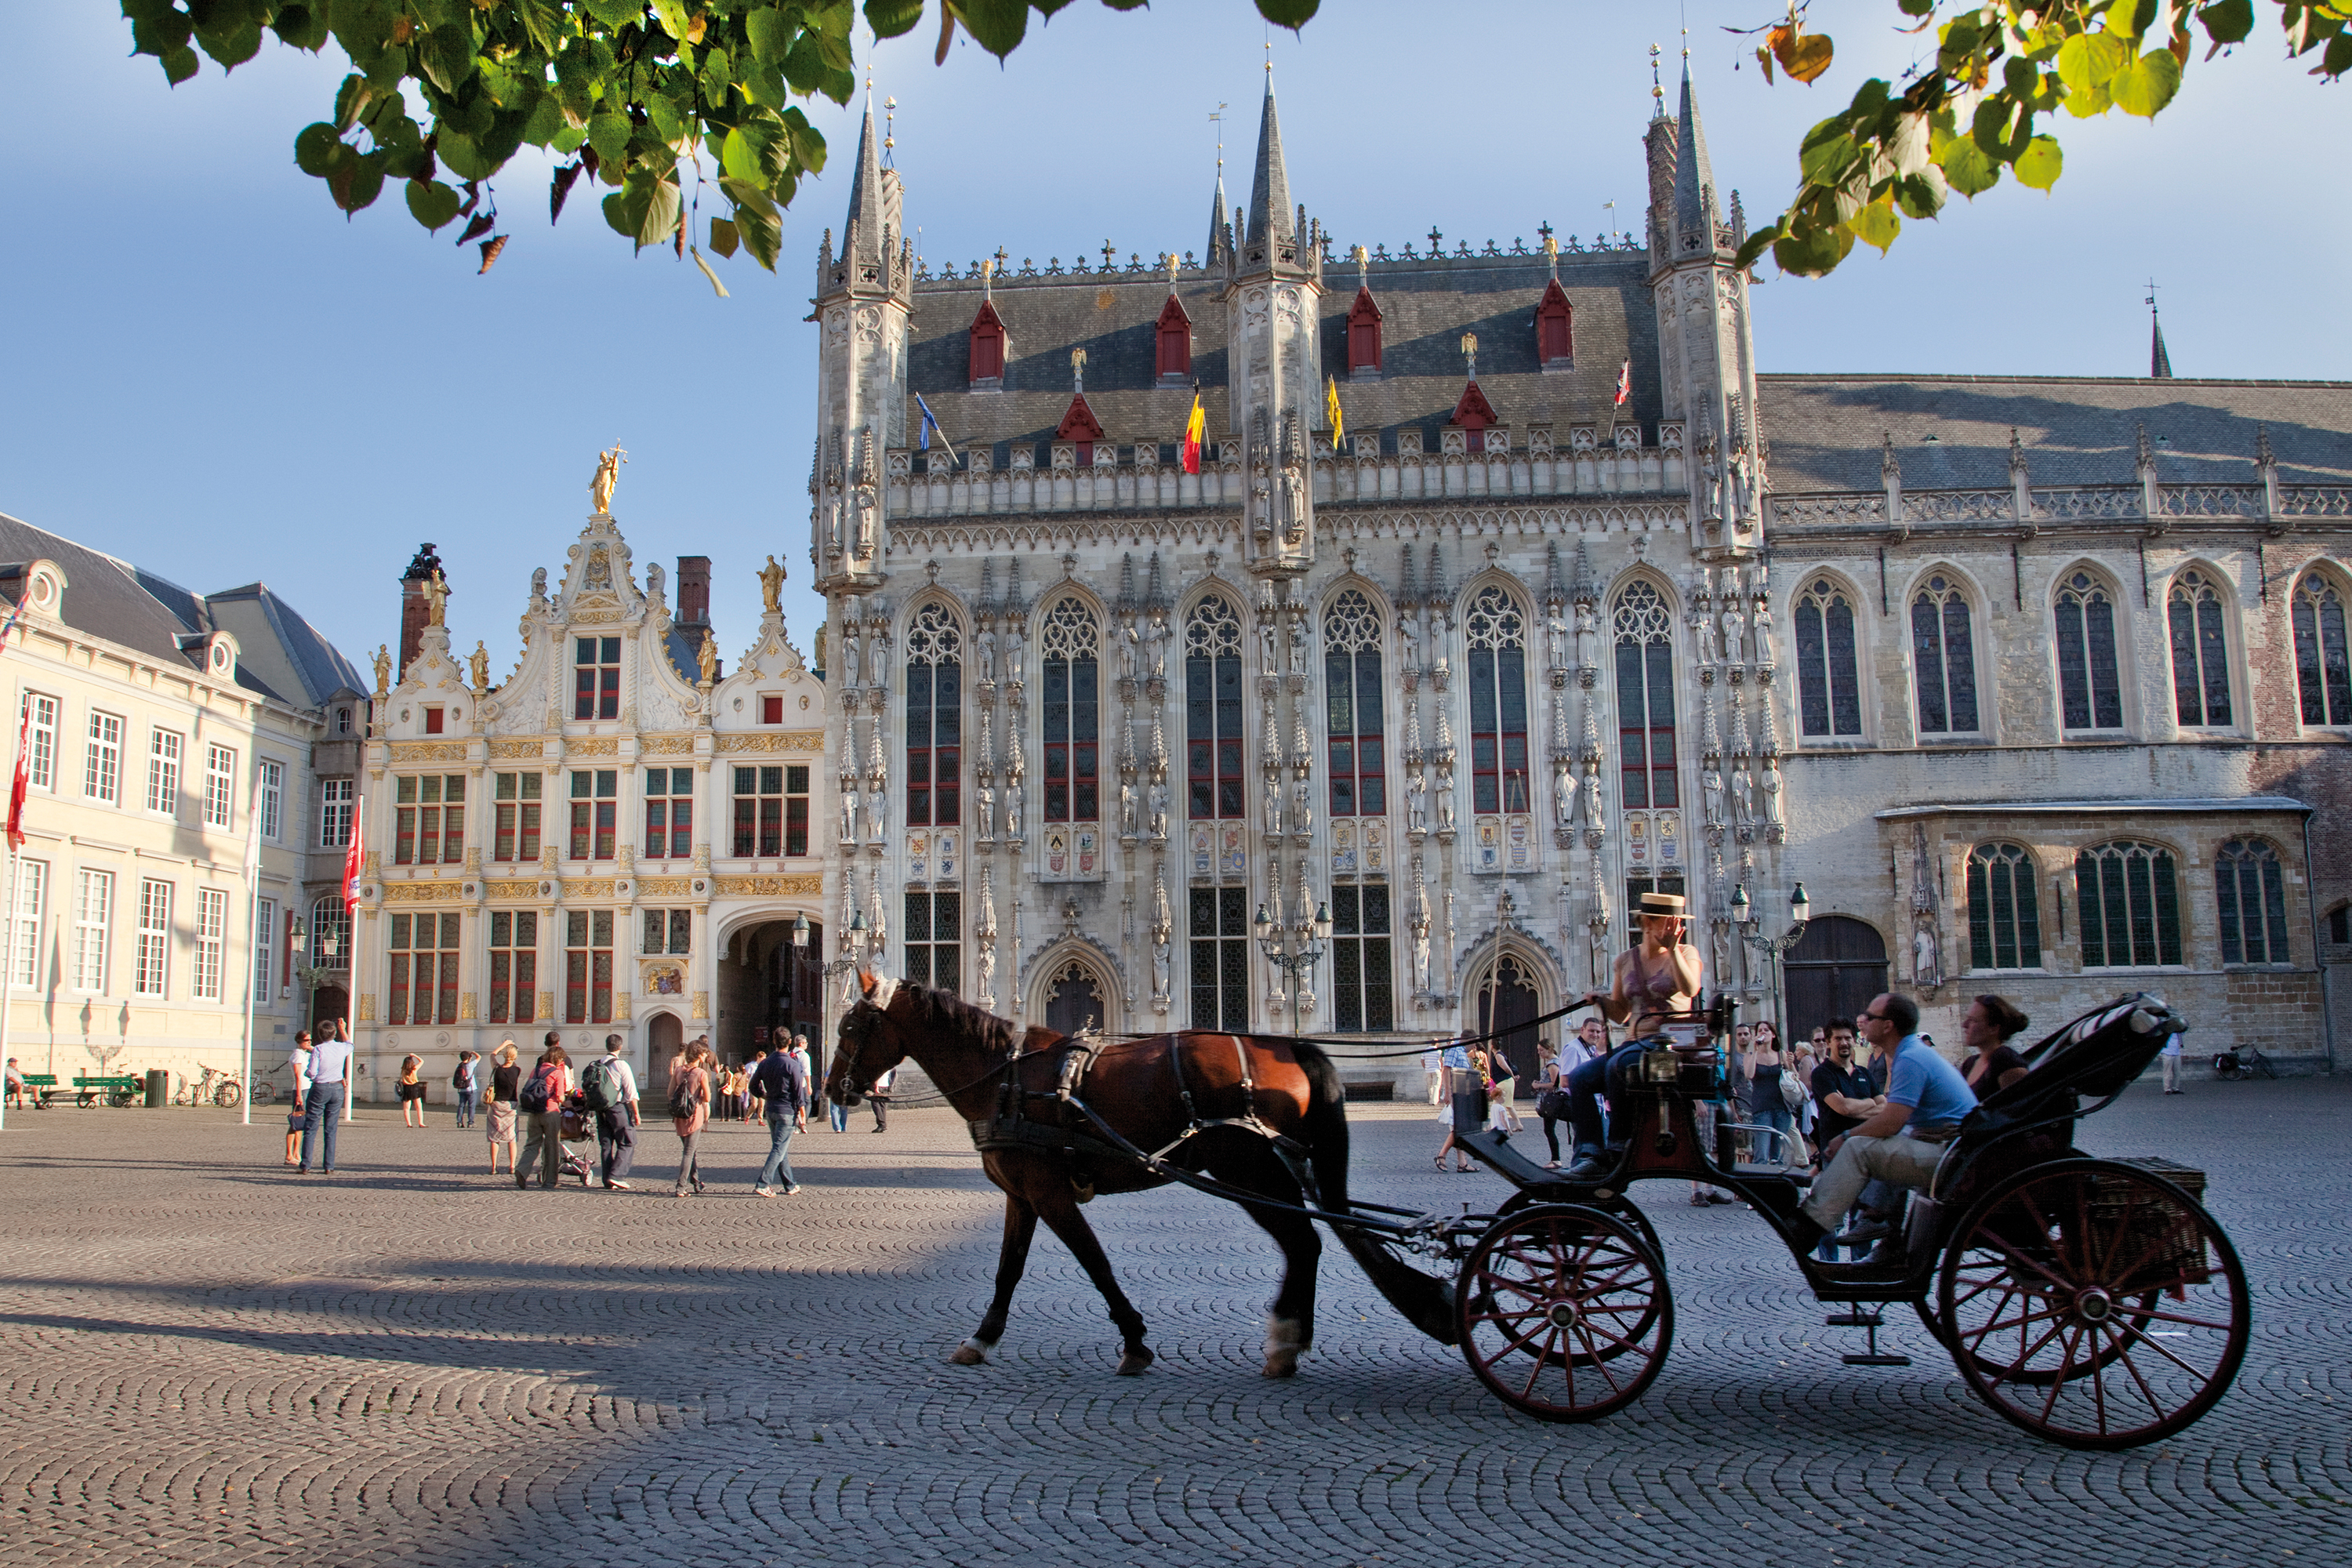 Horse and carriage ride in Bruges centre